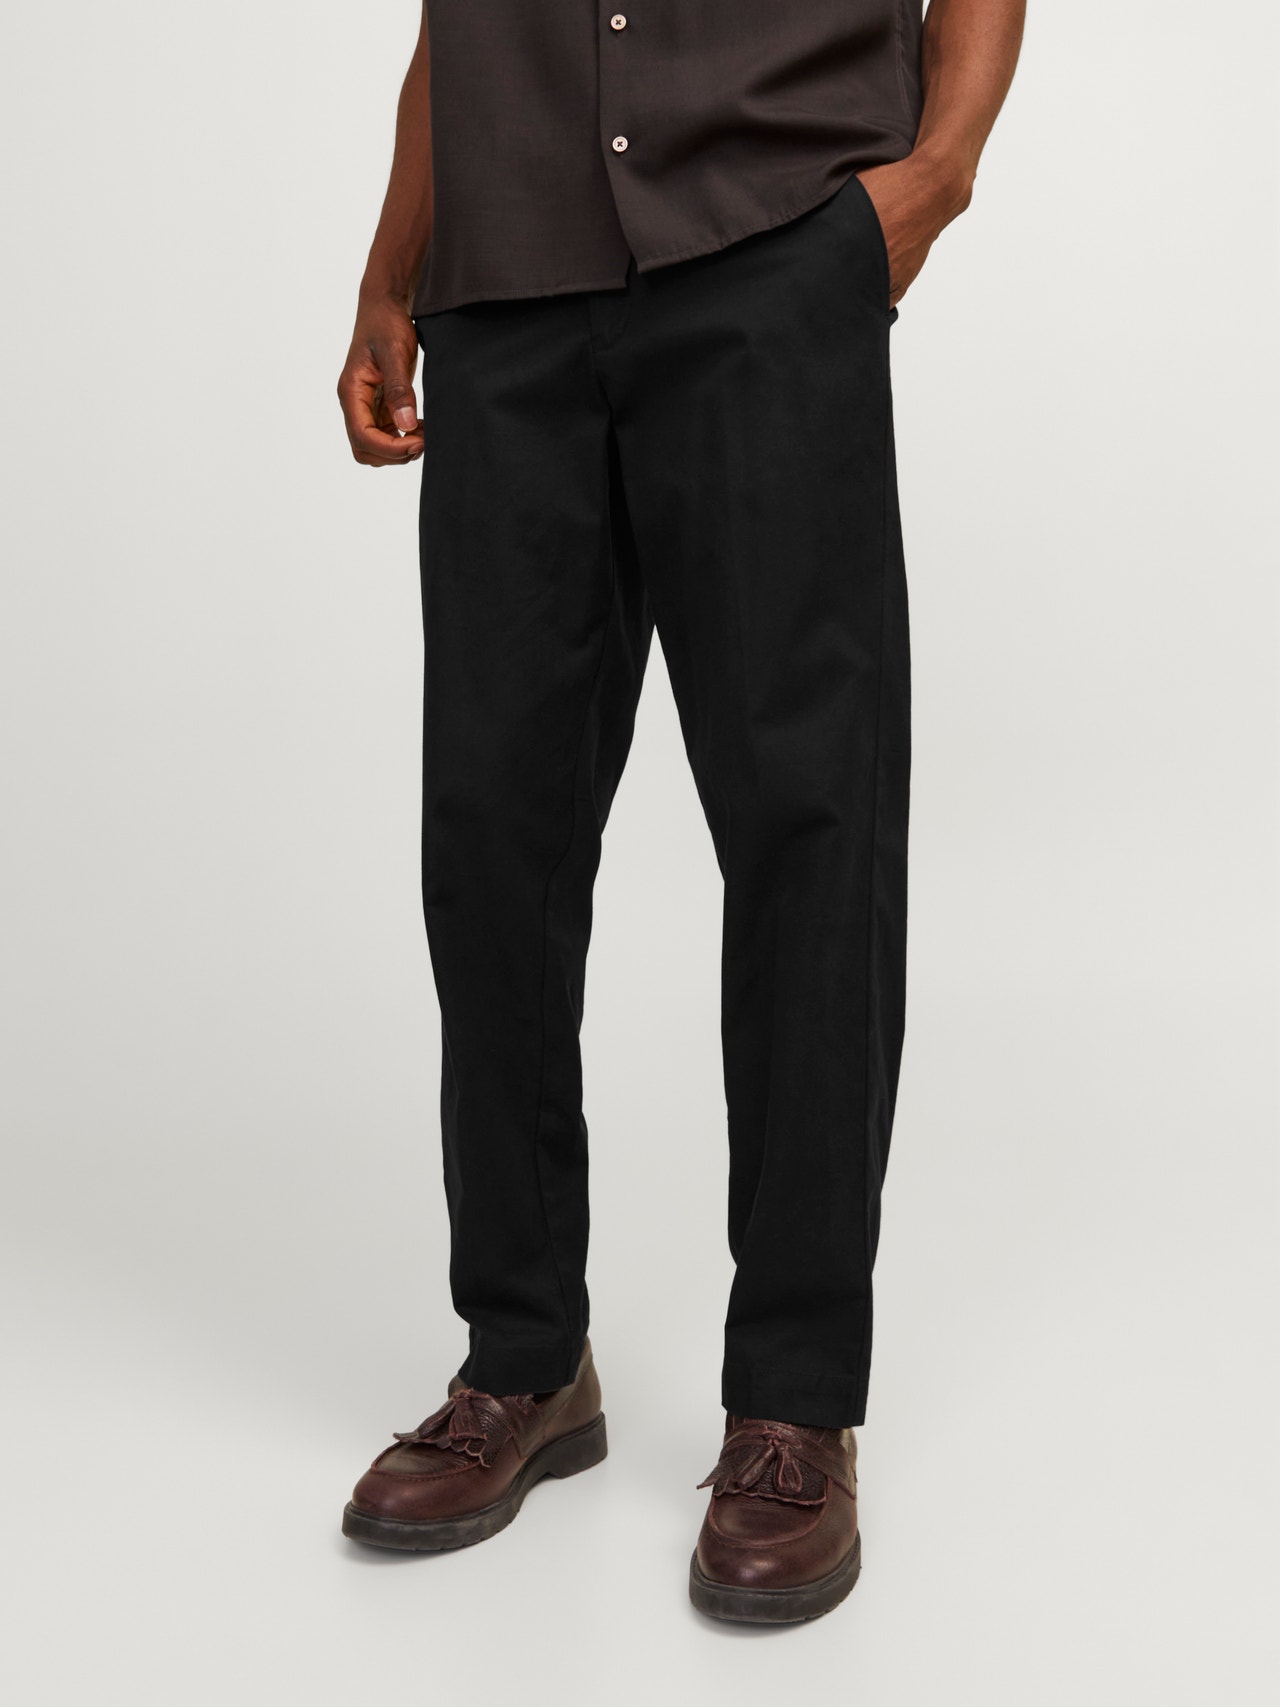 Jack & Jones Relaxed Fit Chinos -Black - 12255441